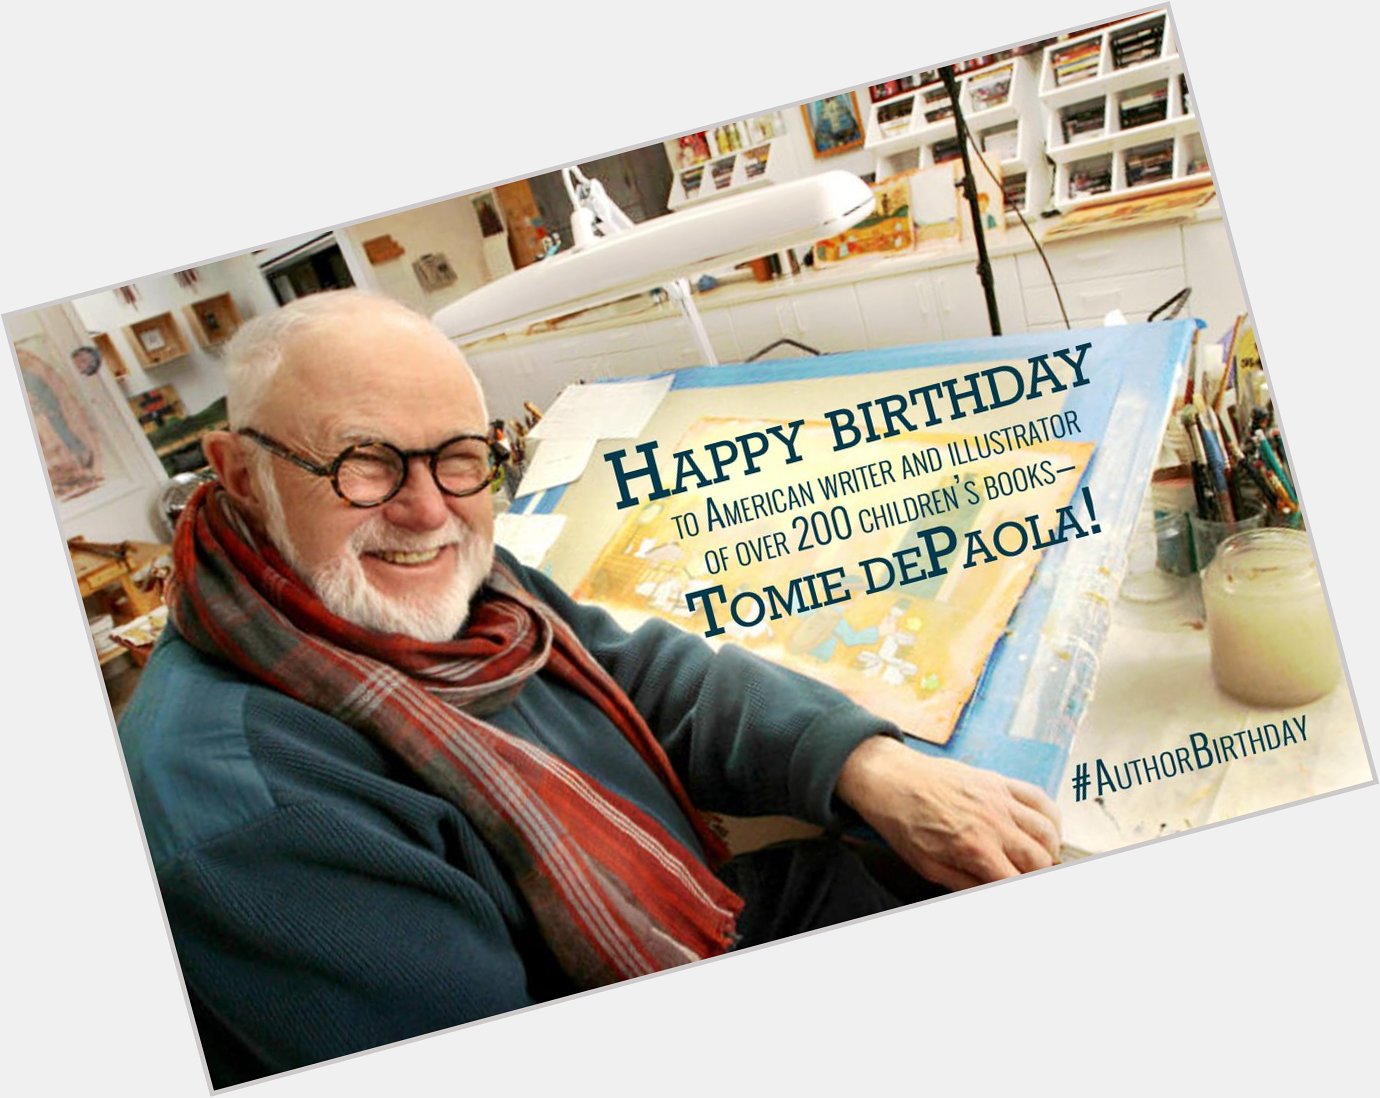 Happy Birthday to Tomie dePaola American writer and illustrator of over 200 children\s books! 